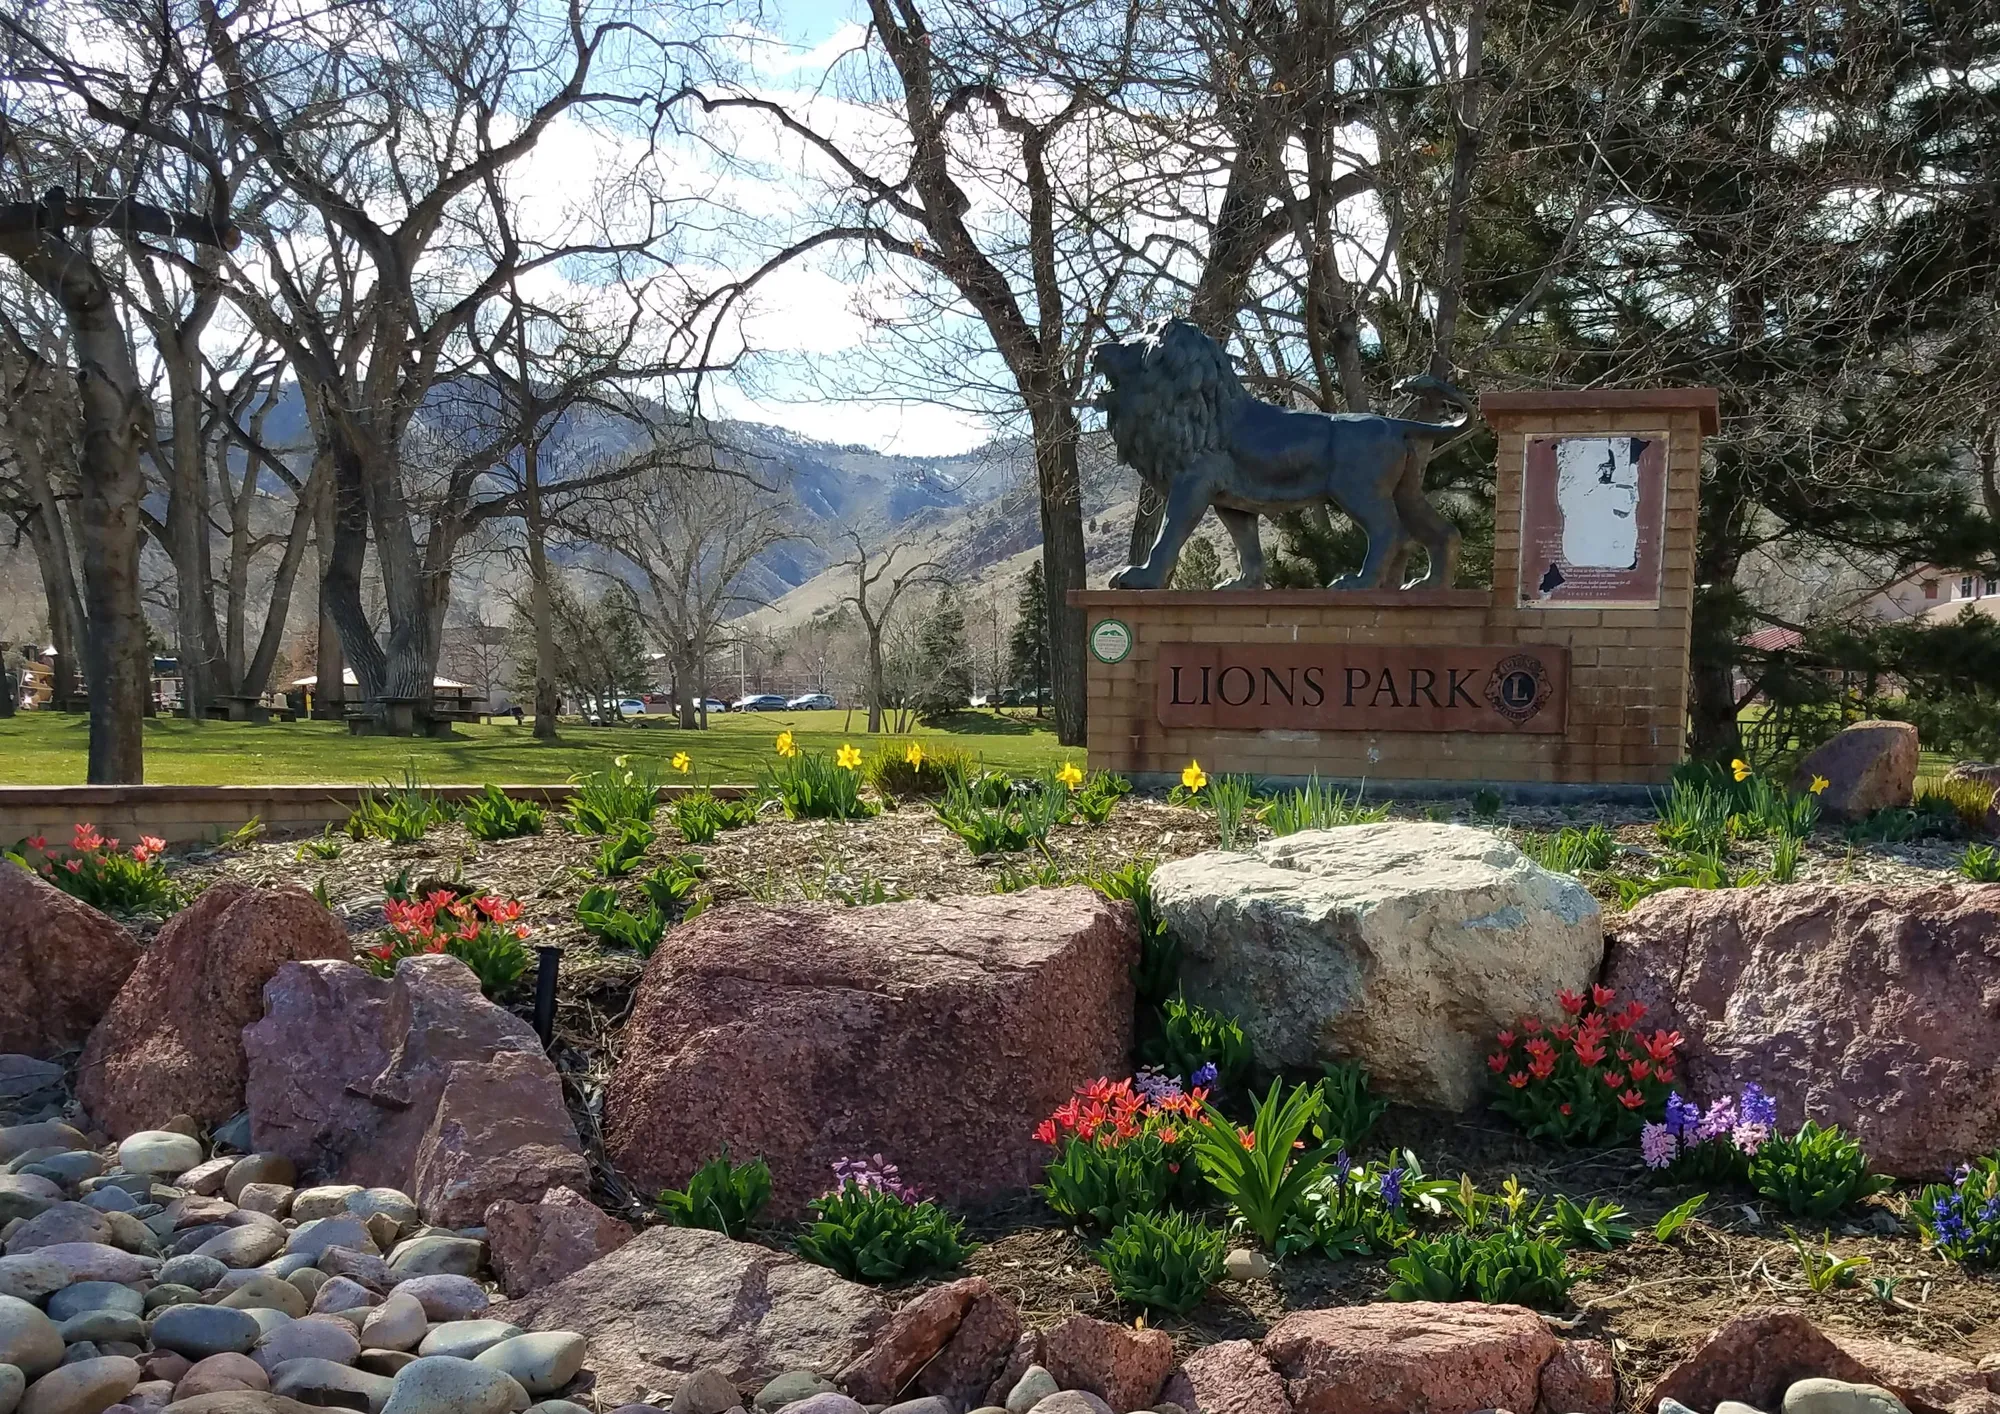 Rock garden with spring flowers. bronze lion on "Lions Park" sign, mountains and bare trees in background.